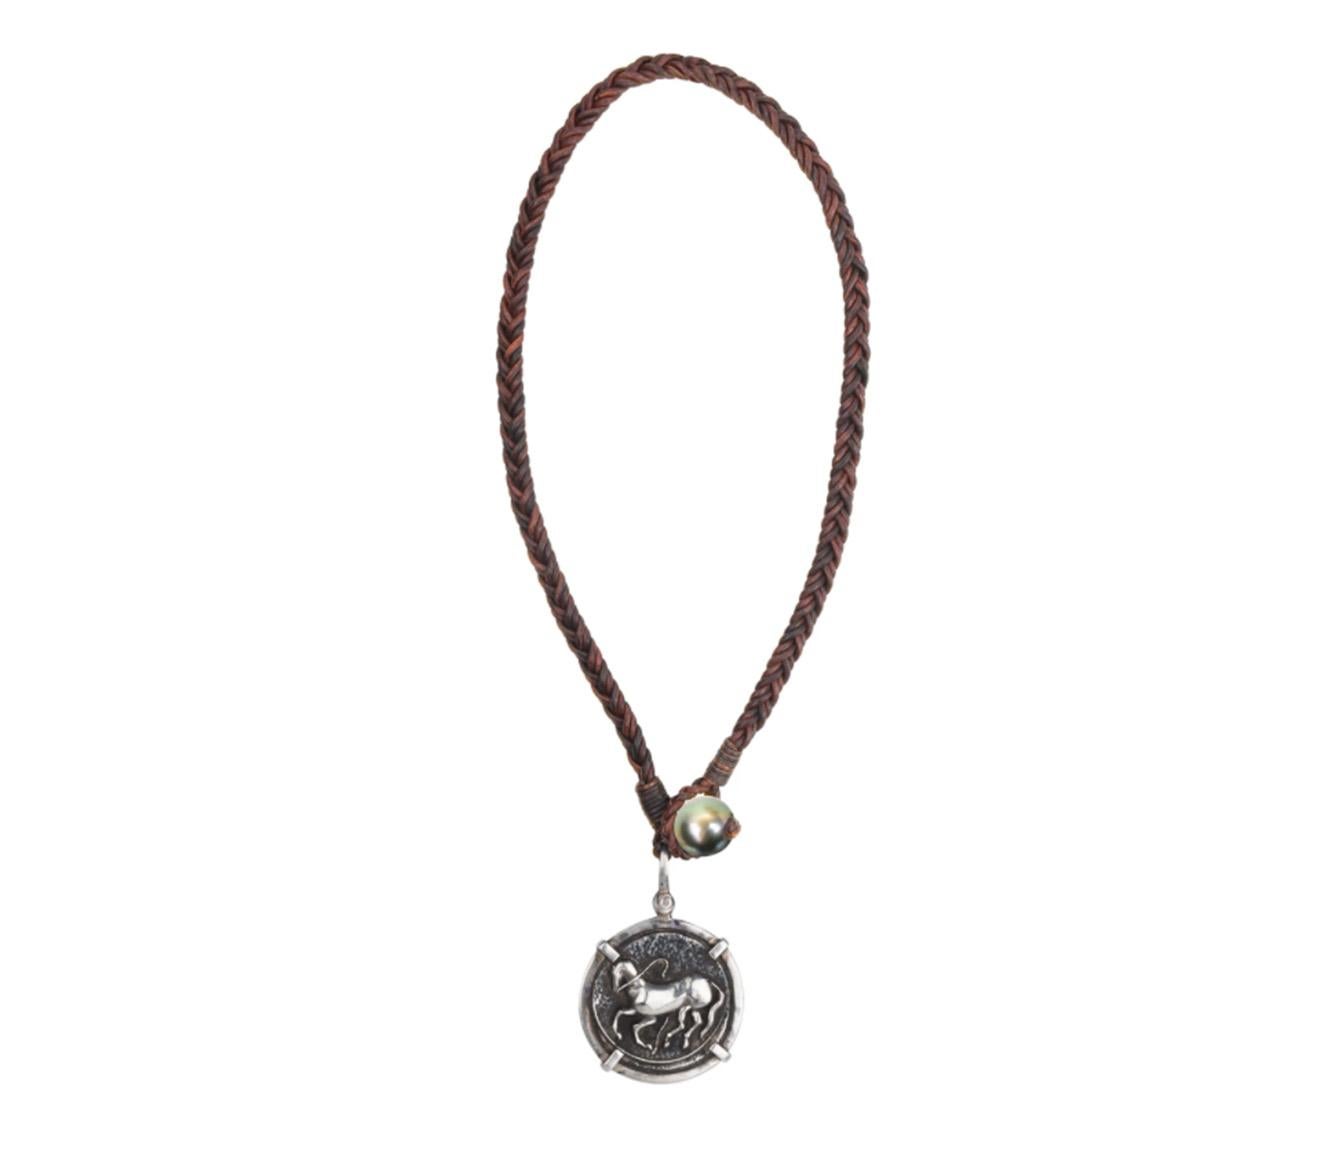 Part of the Vincent Peach Coin Collection, the Trojan Coin Necklace features a signature, Sterling 
Silver Trojan Coin on a Premium Braided Leather Cord with a luxurious, Tahitian Pearl Clasp. This necklace comes in Standard 17